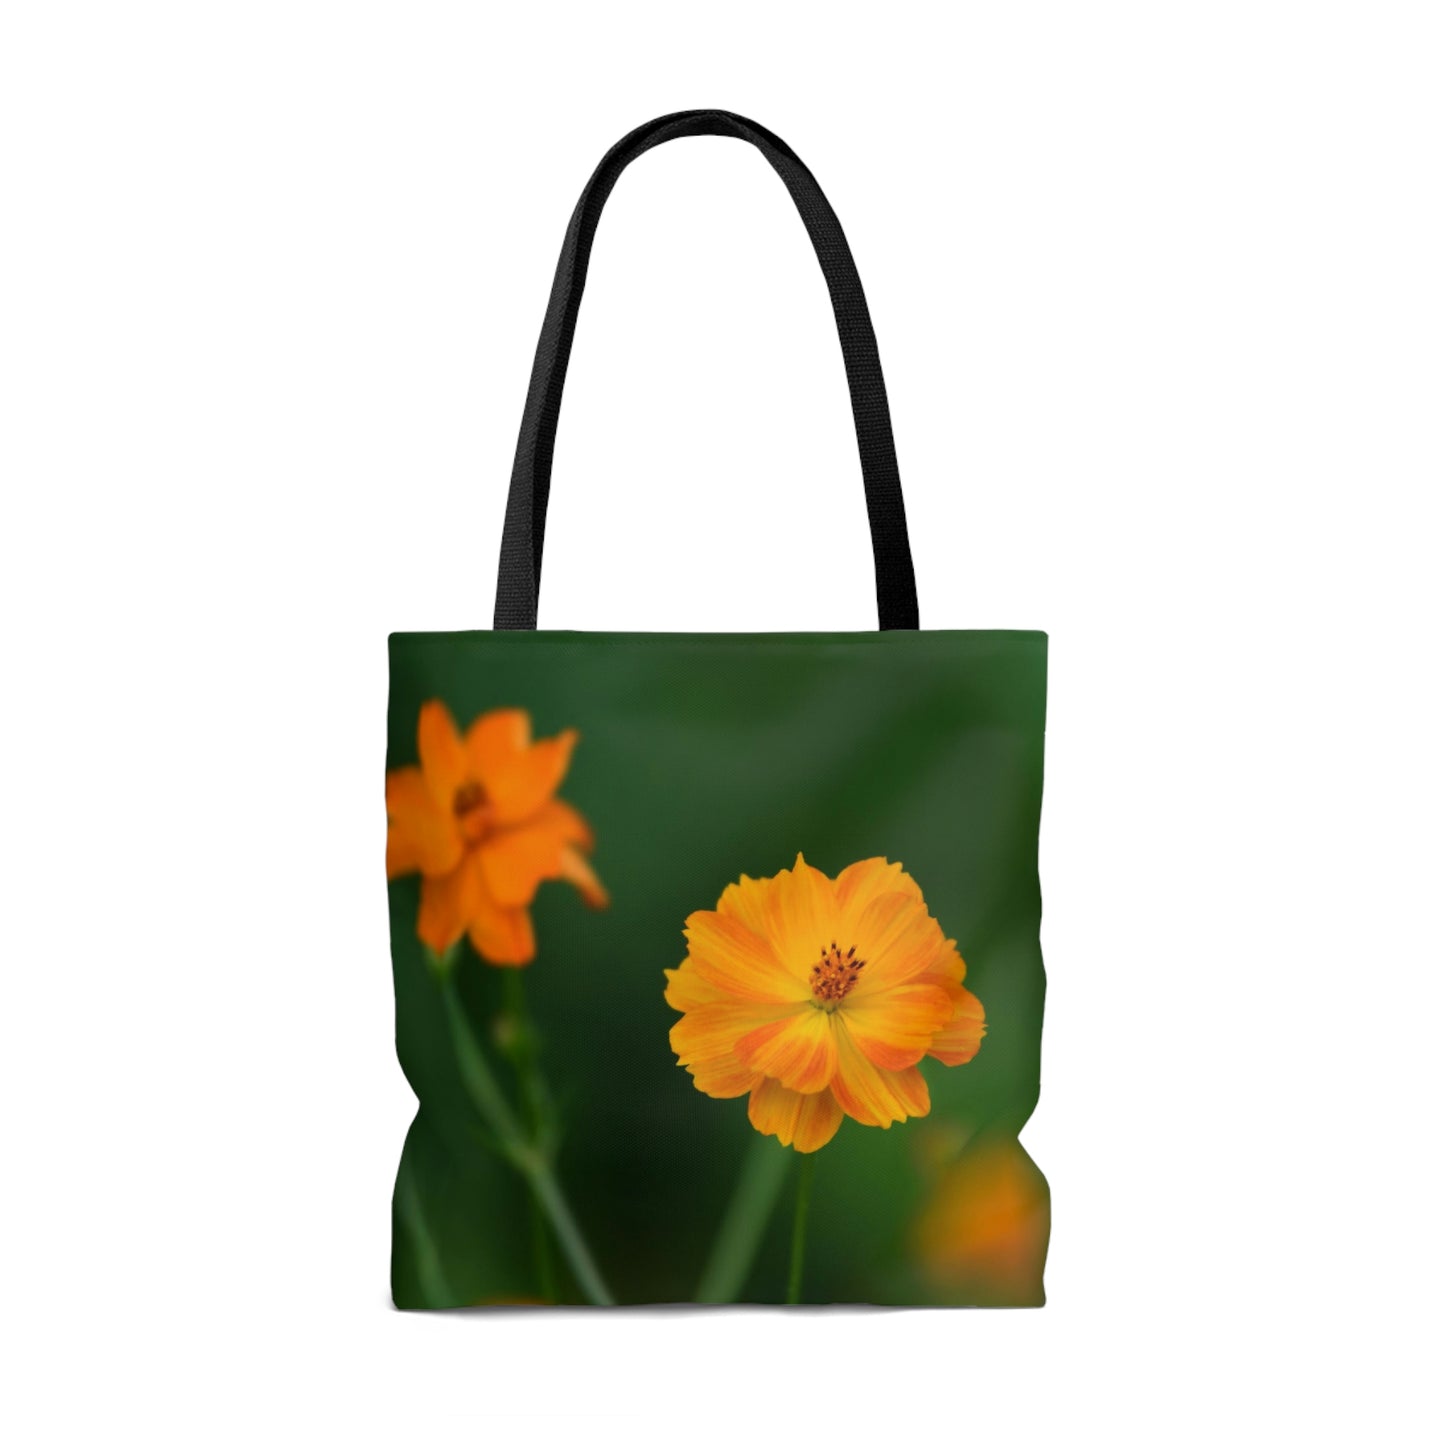 Floral Beauty Art Tote